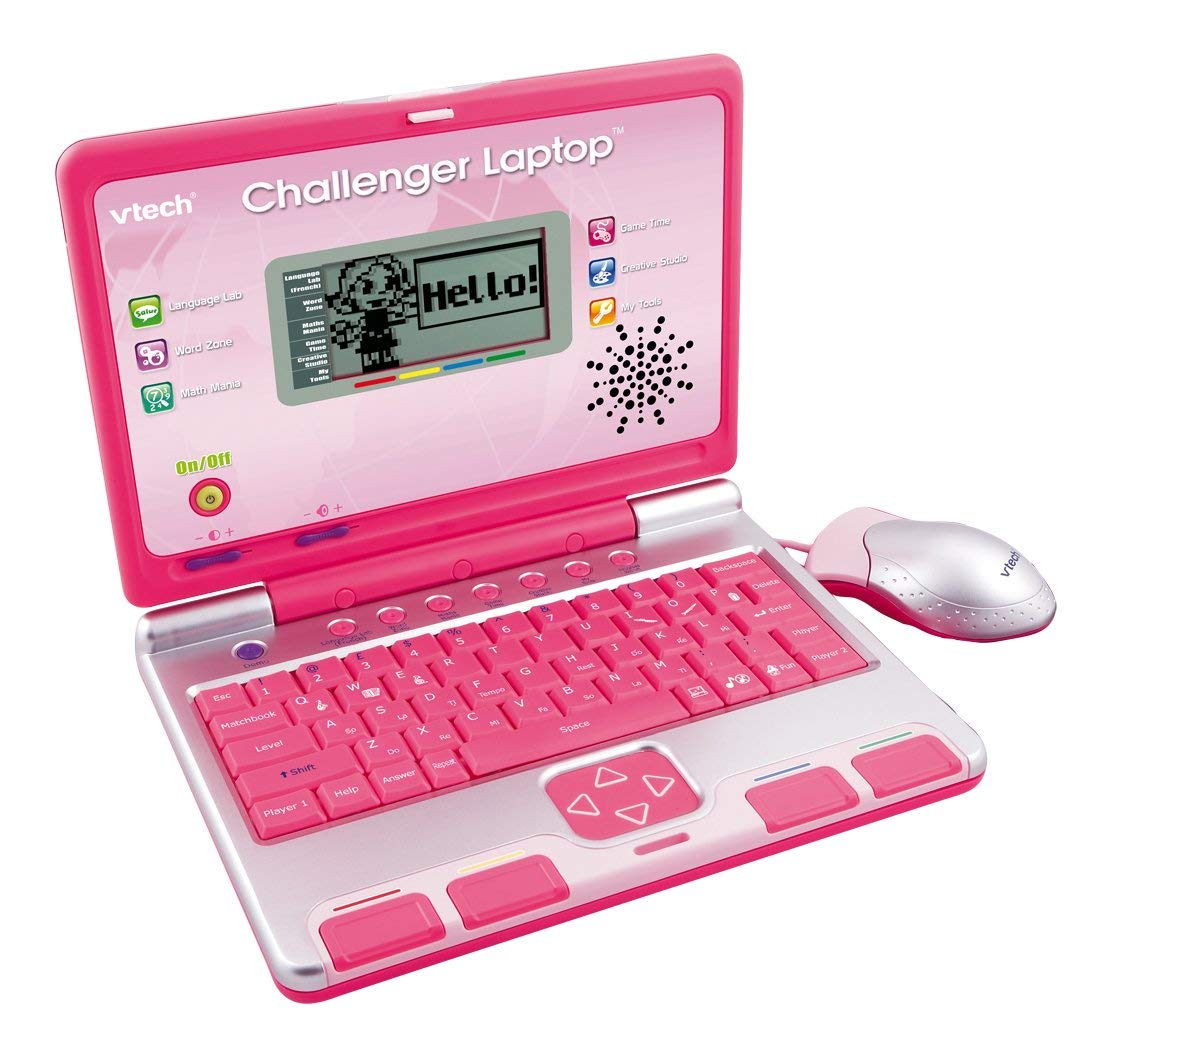 VTech+Challenger+Laptop+for+Pre-school+Kids%C2%A6learn+Letters+Vocabulary+Maths+Music  for sale online